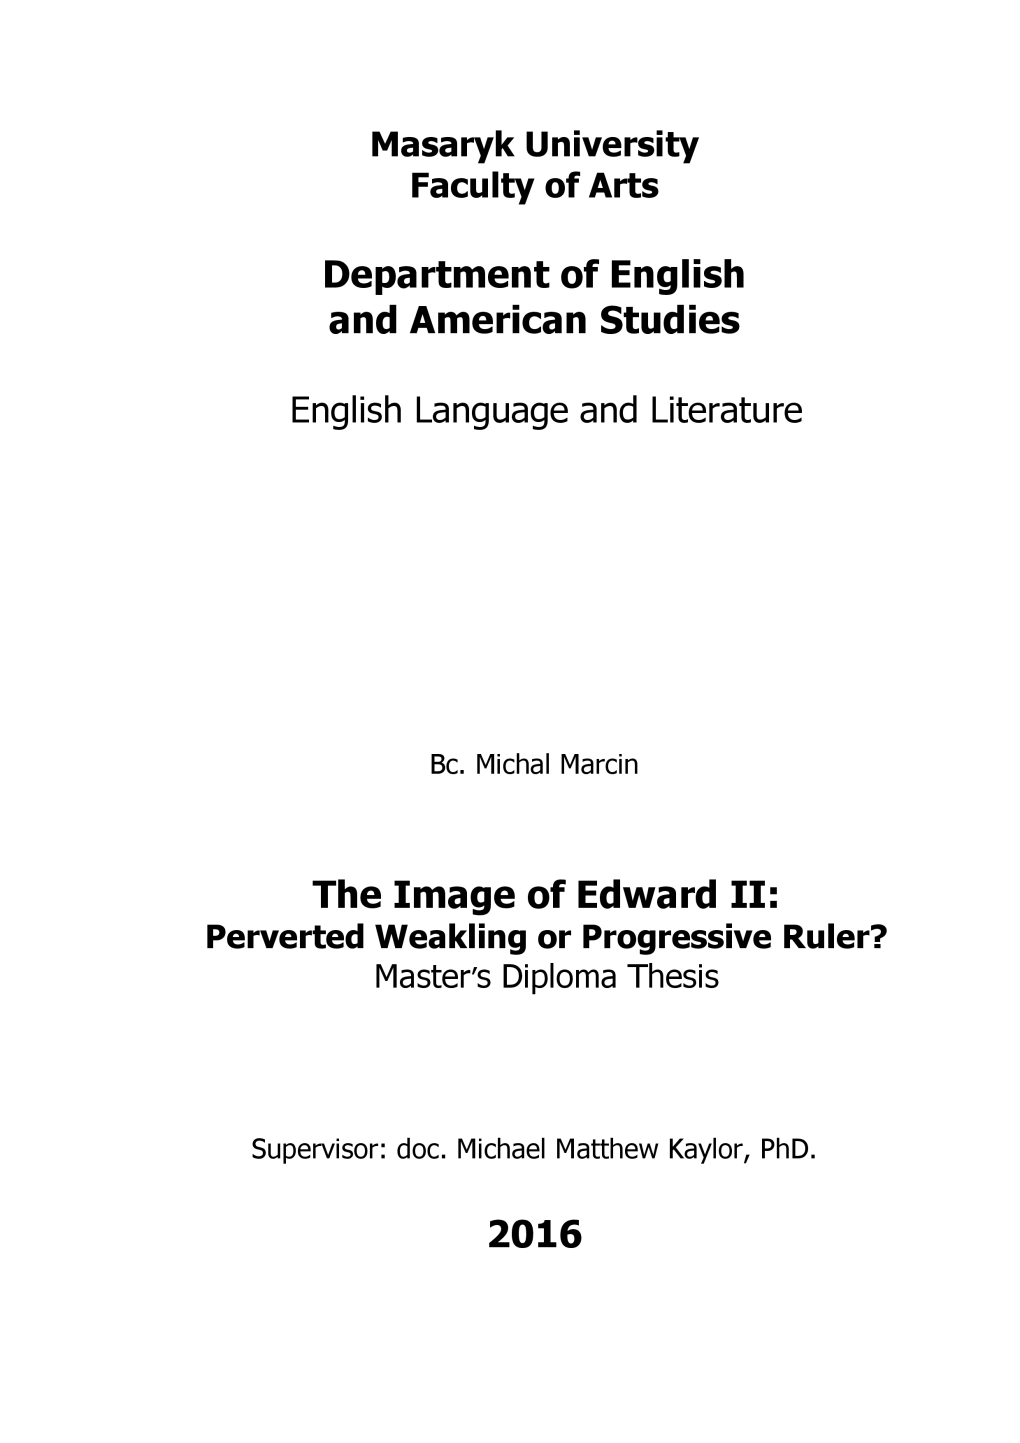 Department of English and American Studies the Image